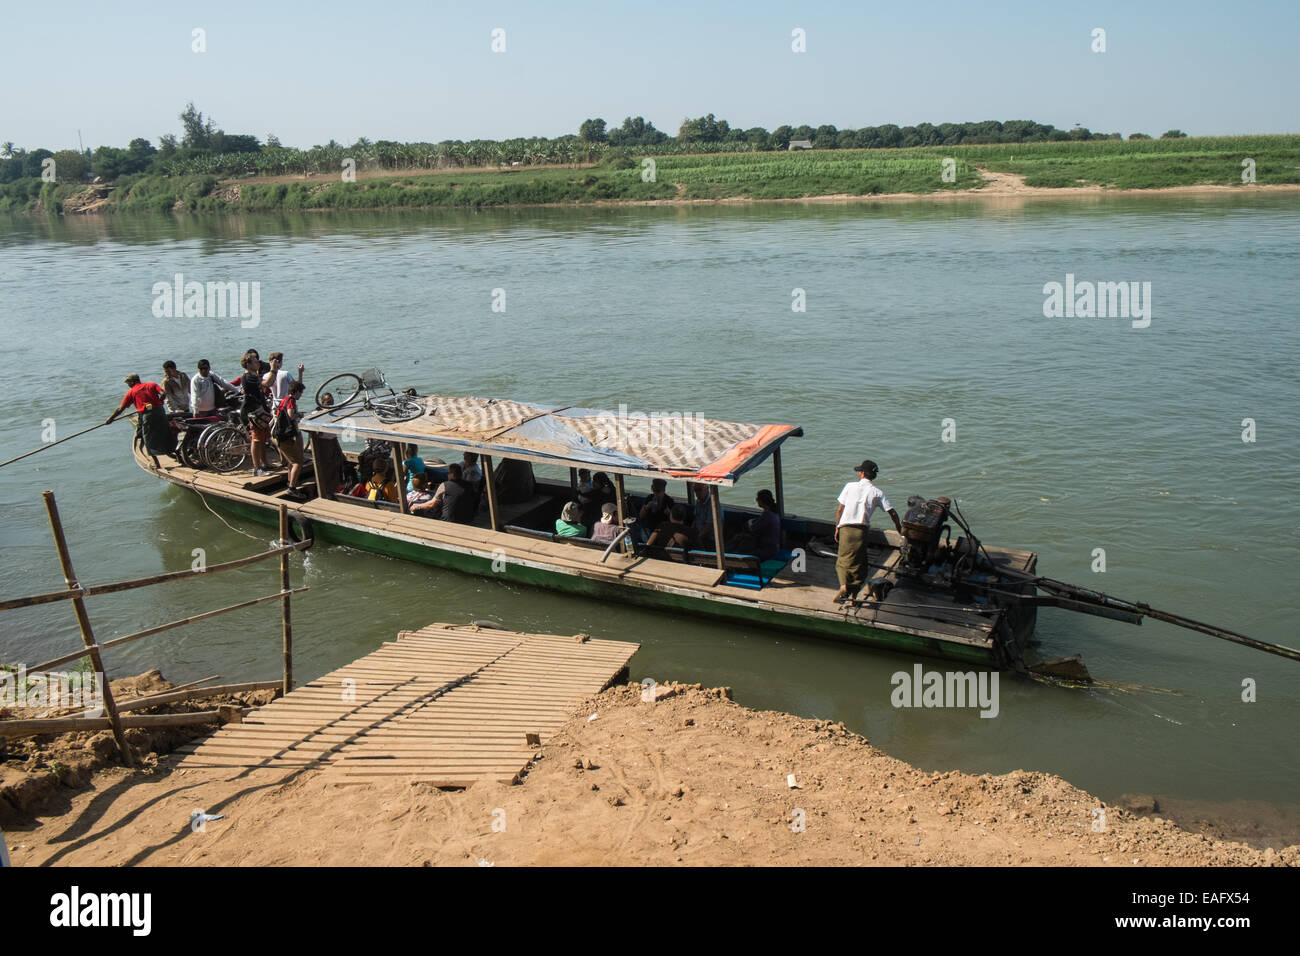 River boat taking locals,bikes,and tourists to and from Inwa, Ava area,across Irrawaddy River,near Mandalay,Burma, Myanmar,Asia, Stock Photo